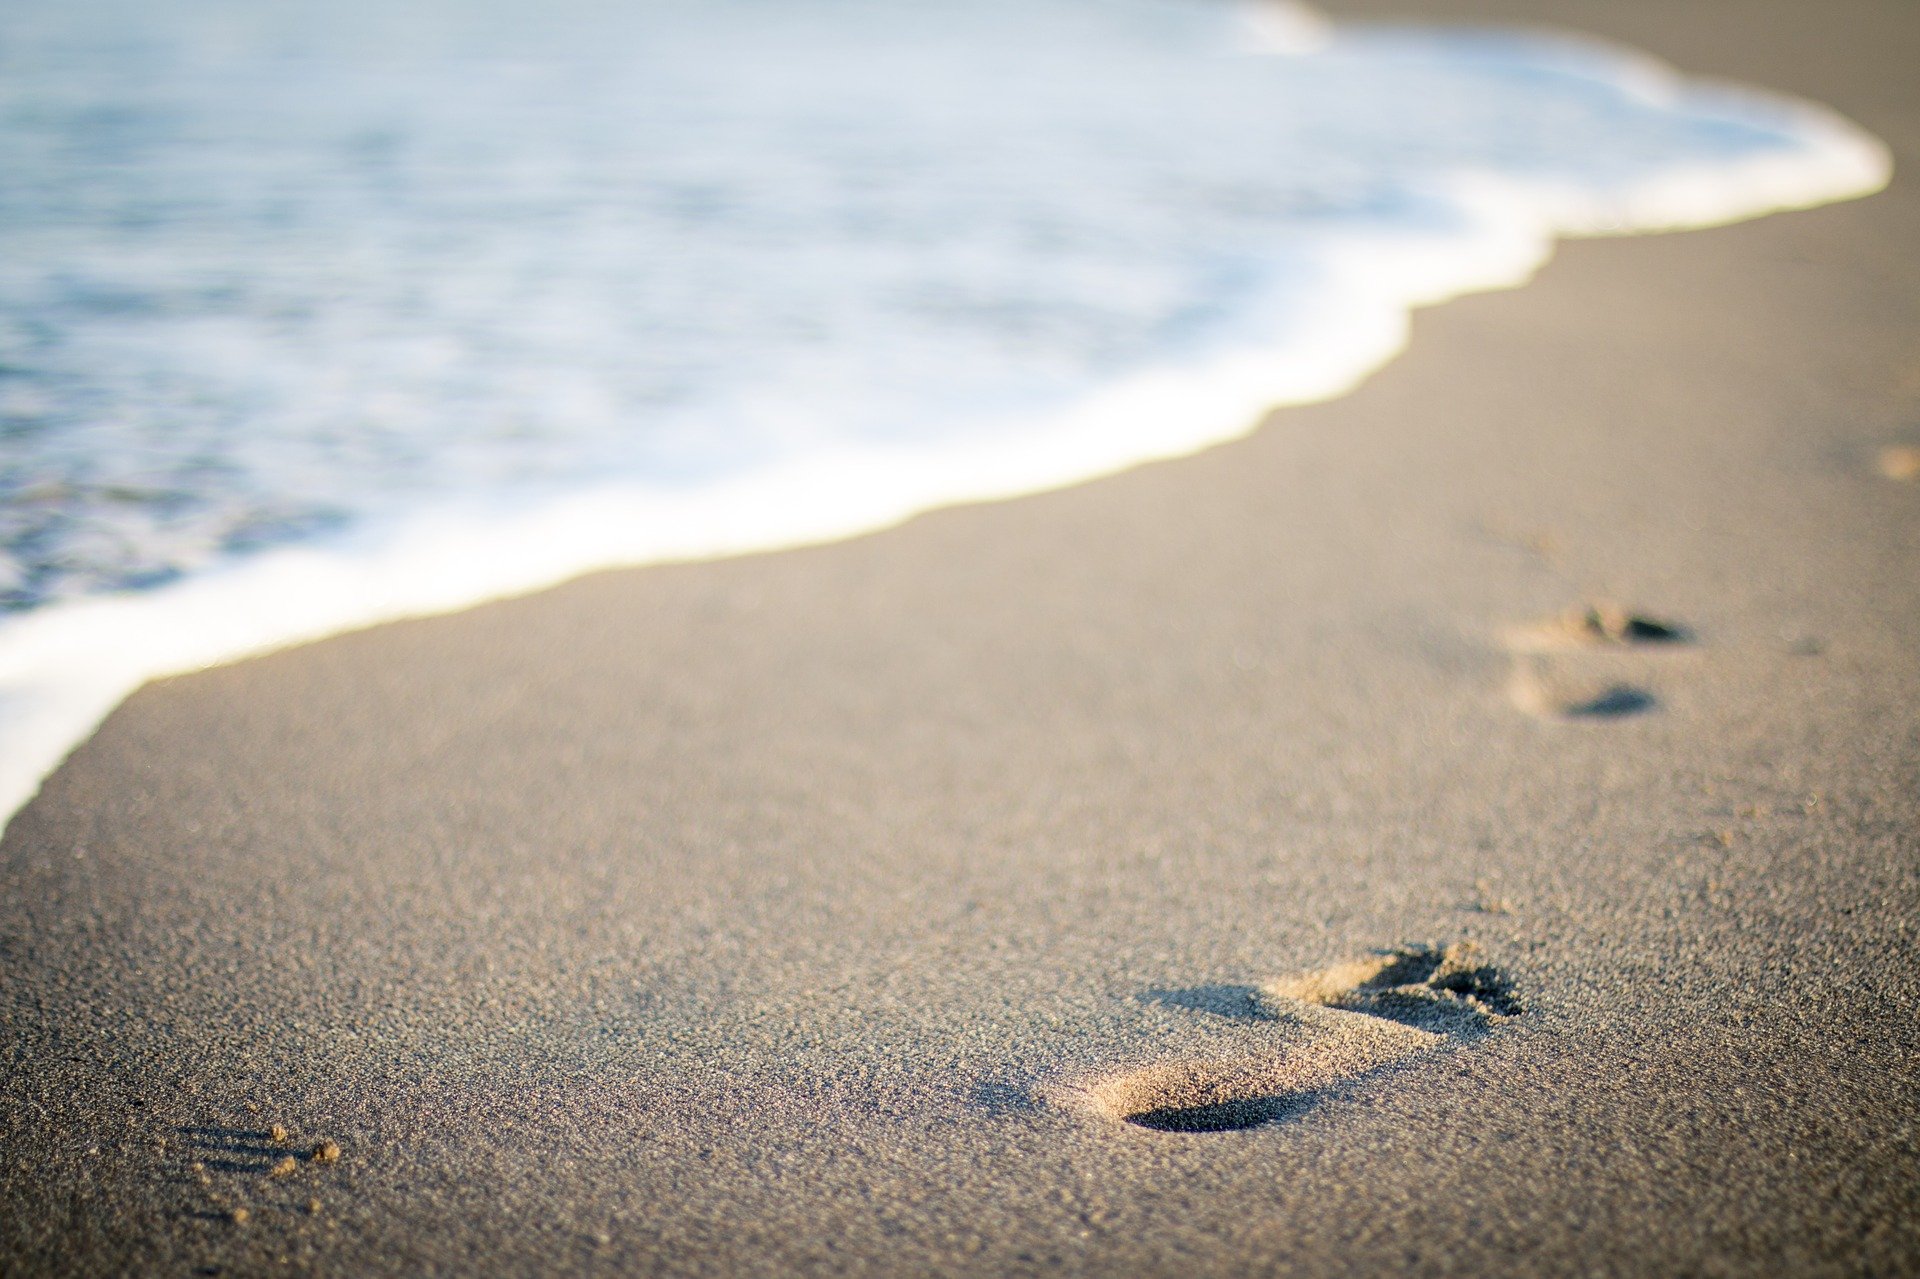 Walk barefoot along the beach when the sand is cooler